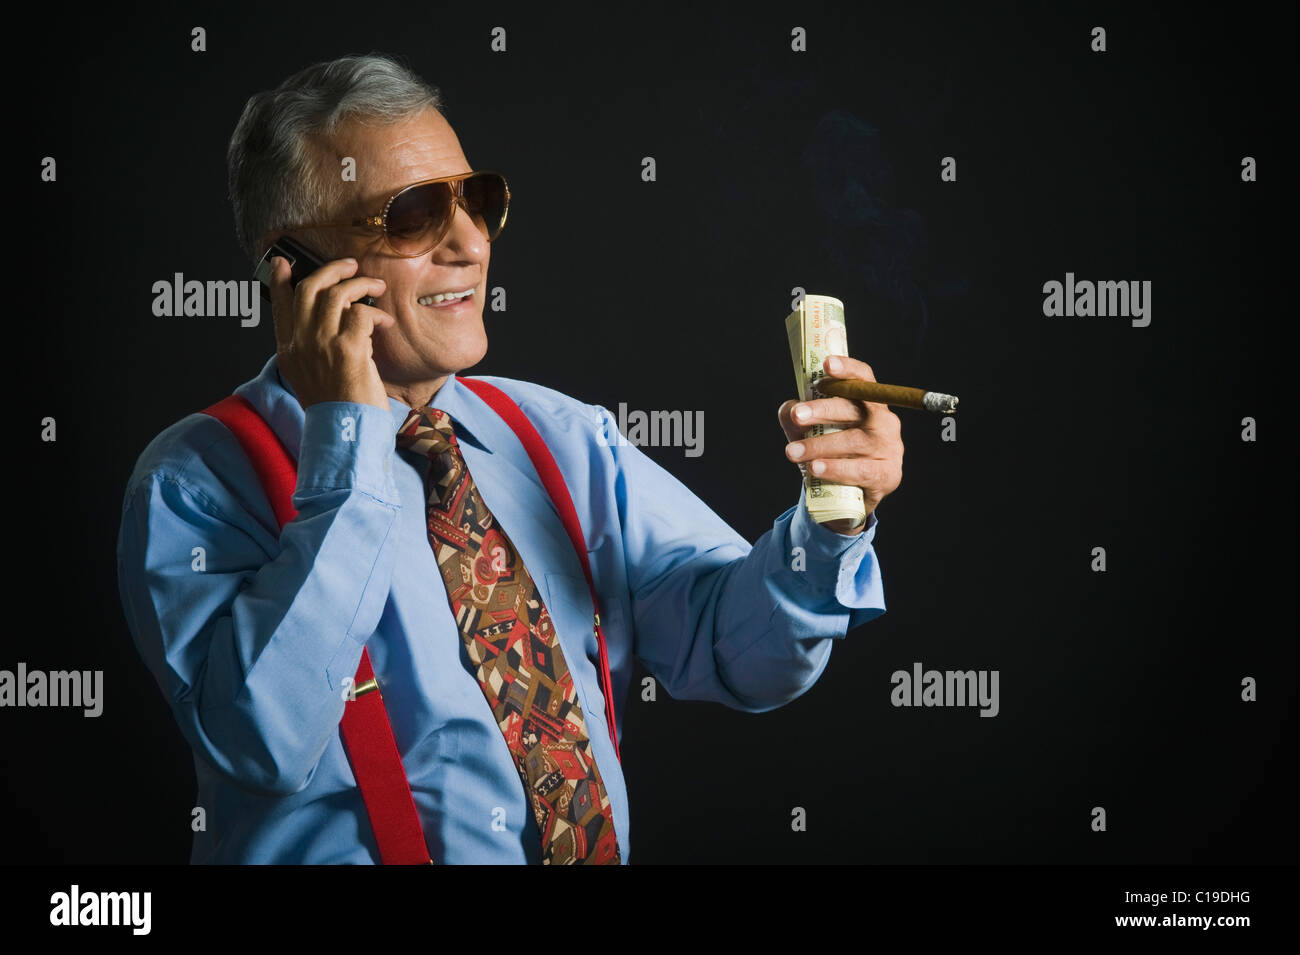 Man talking on a mobile phone and holding money Stock Photo